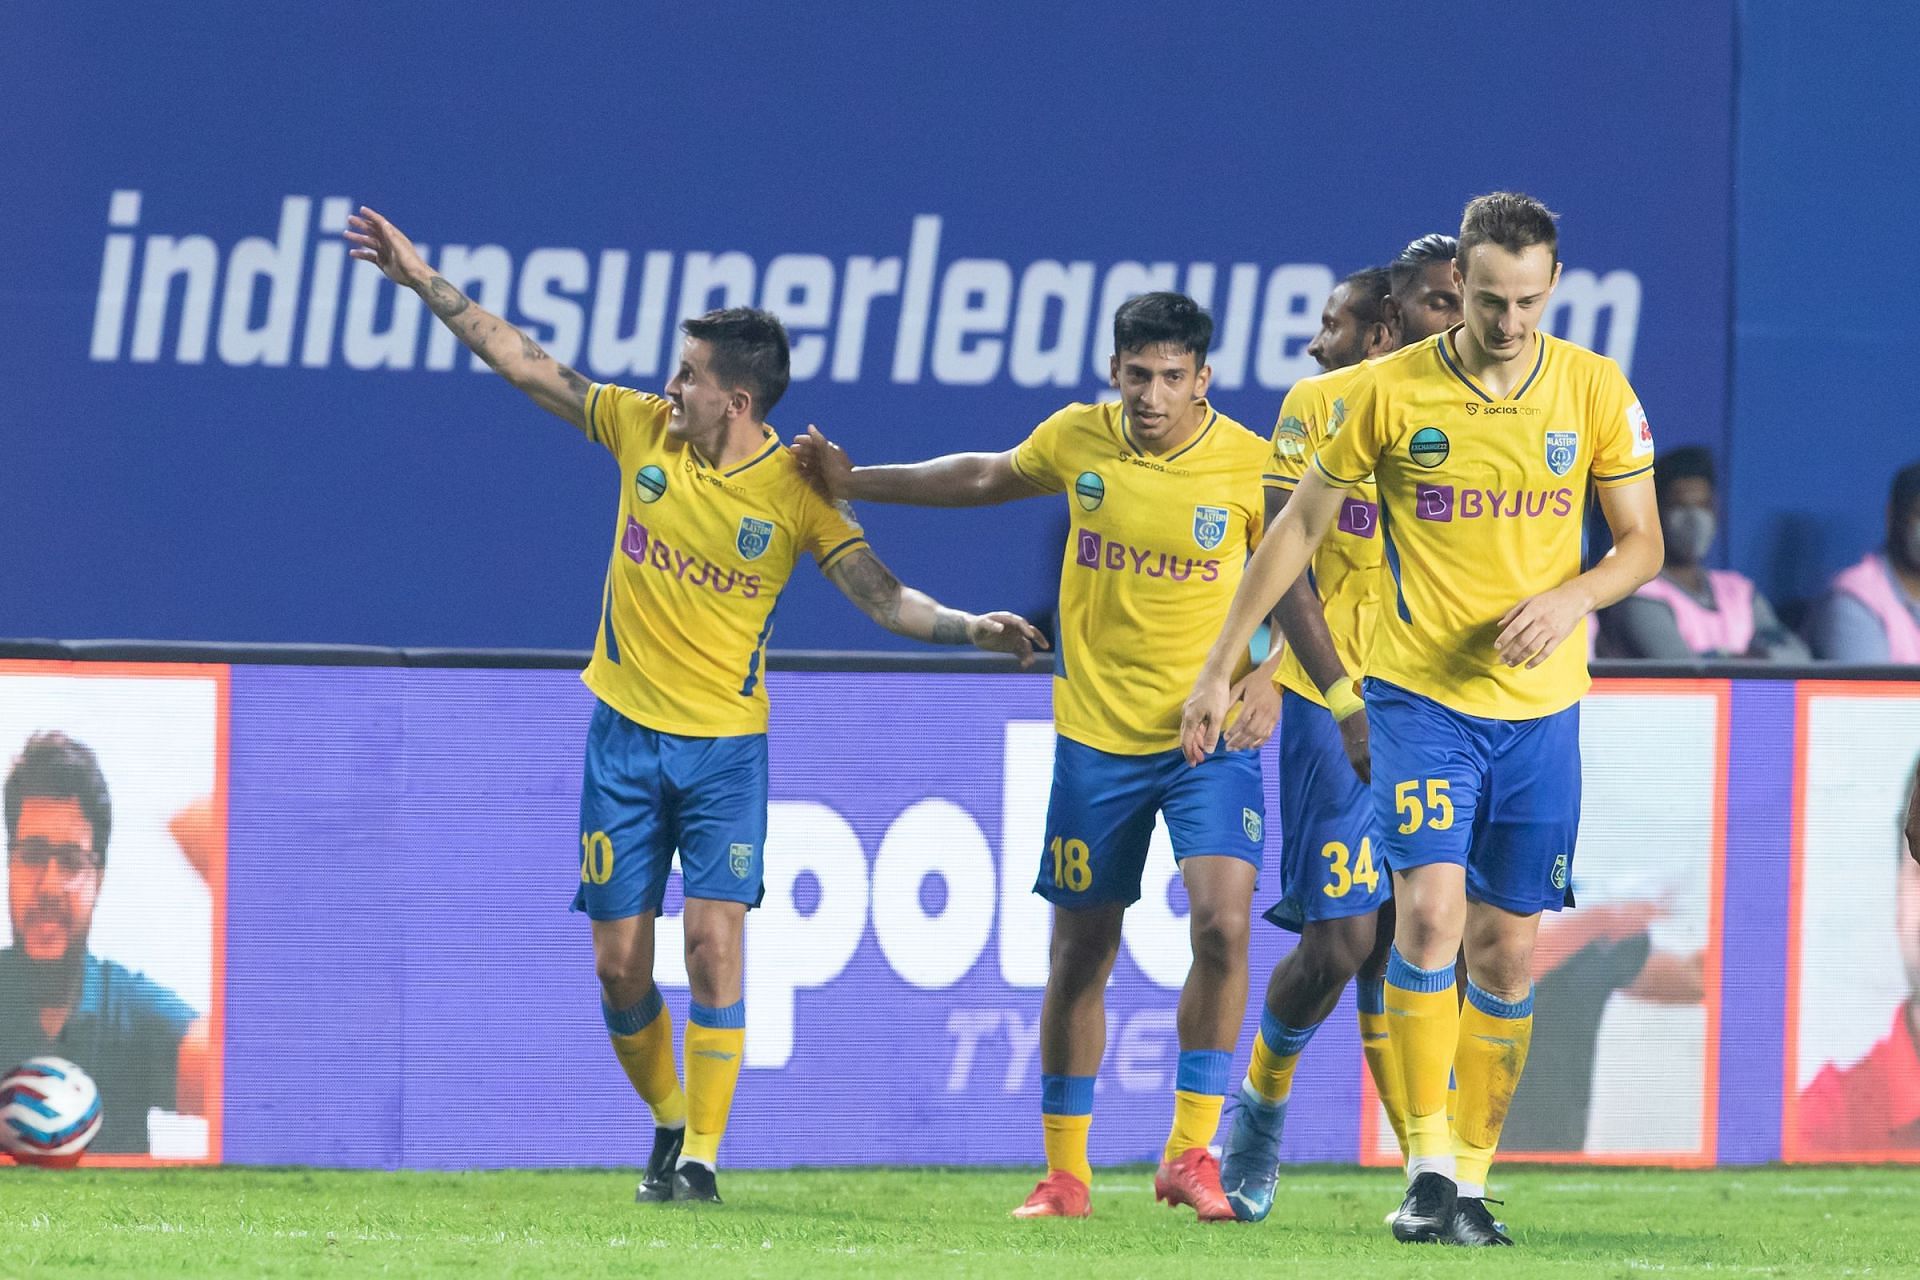 Kerala Blasters FC were unable to hold on to their two goal lead against the Gaurs (Image Courtesy: ISL)